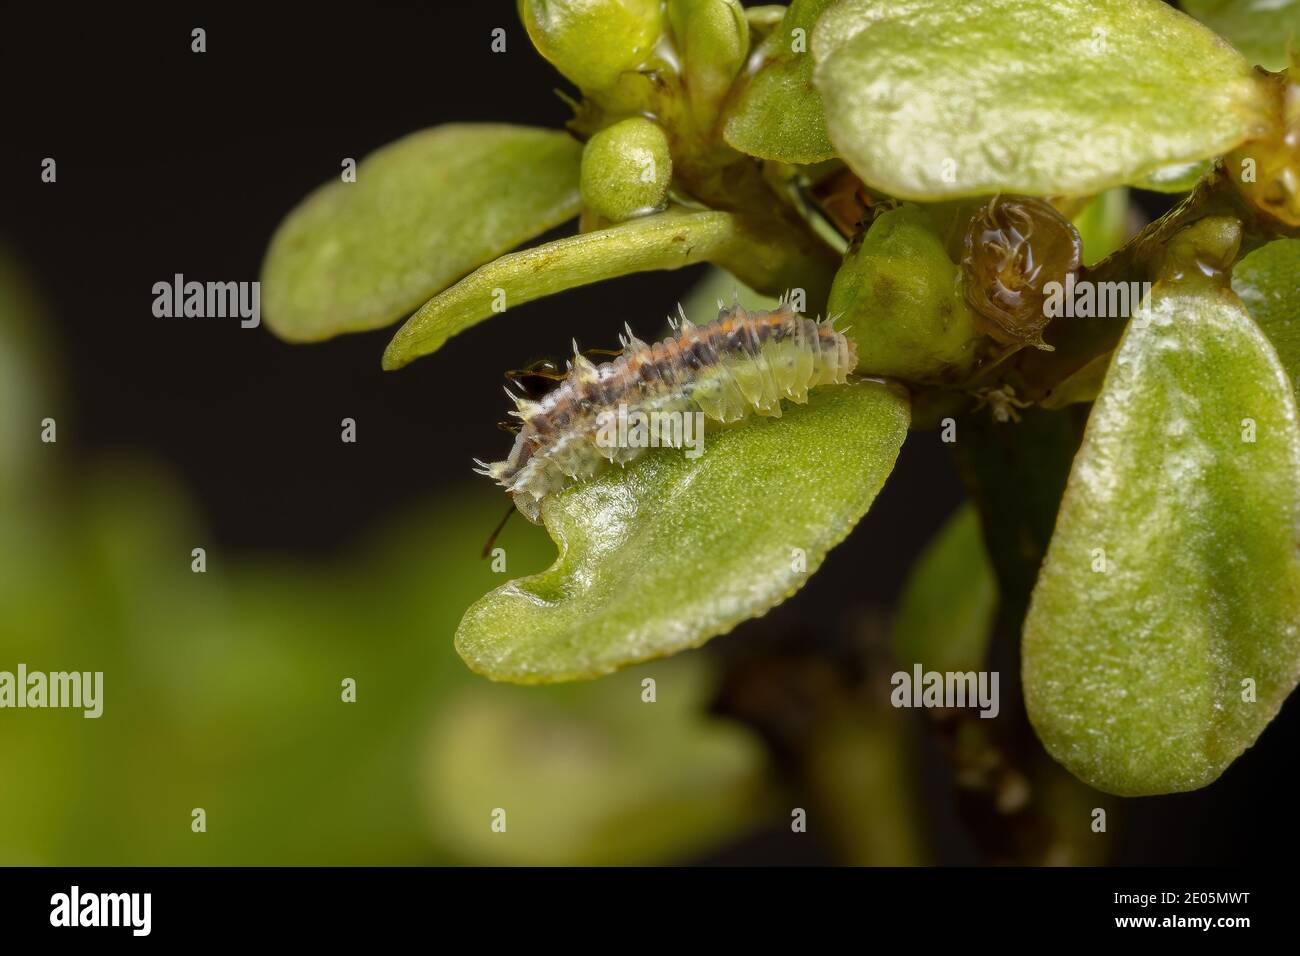 Caterpillar of the order lepidoptera eating a Common Purslane plant of the species Portulaca oleracea Stock Photo